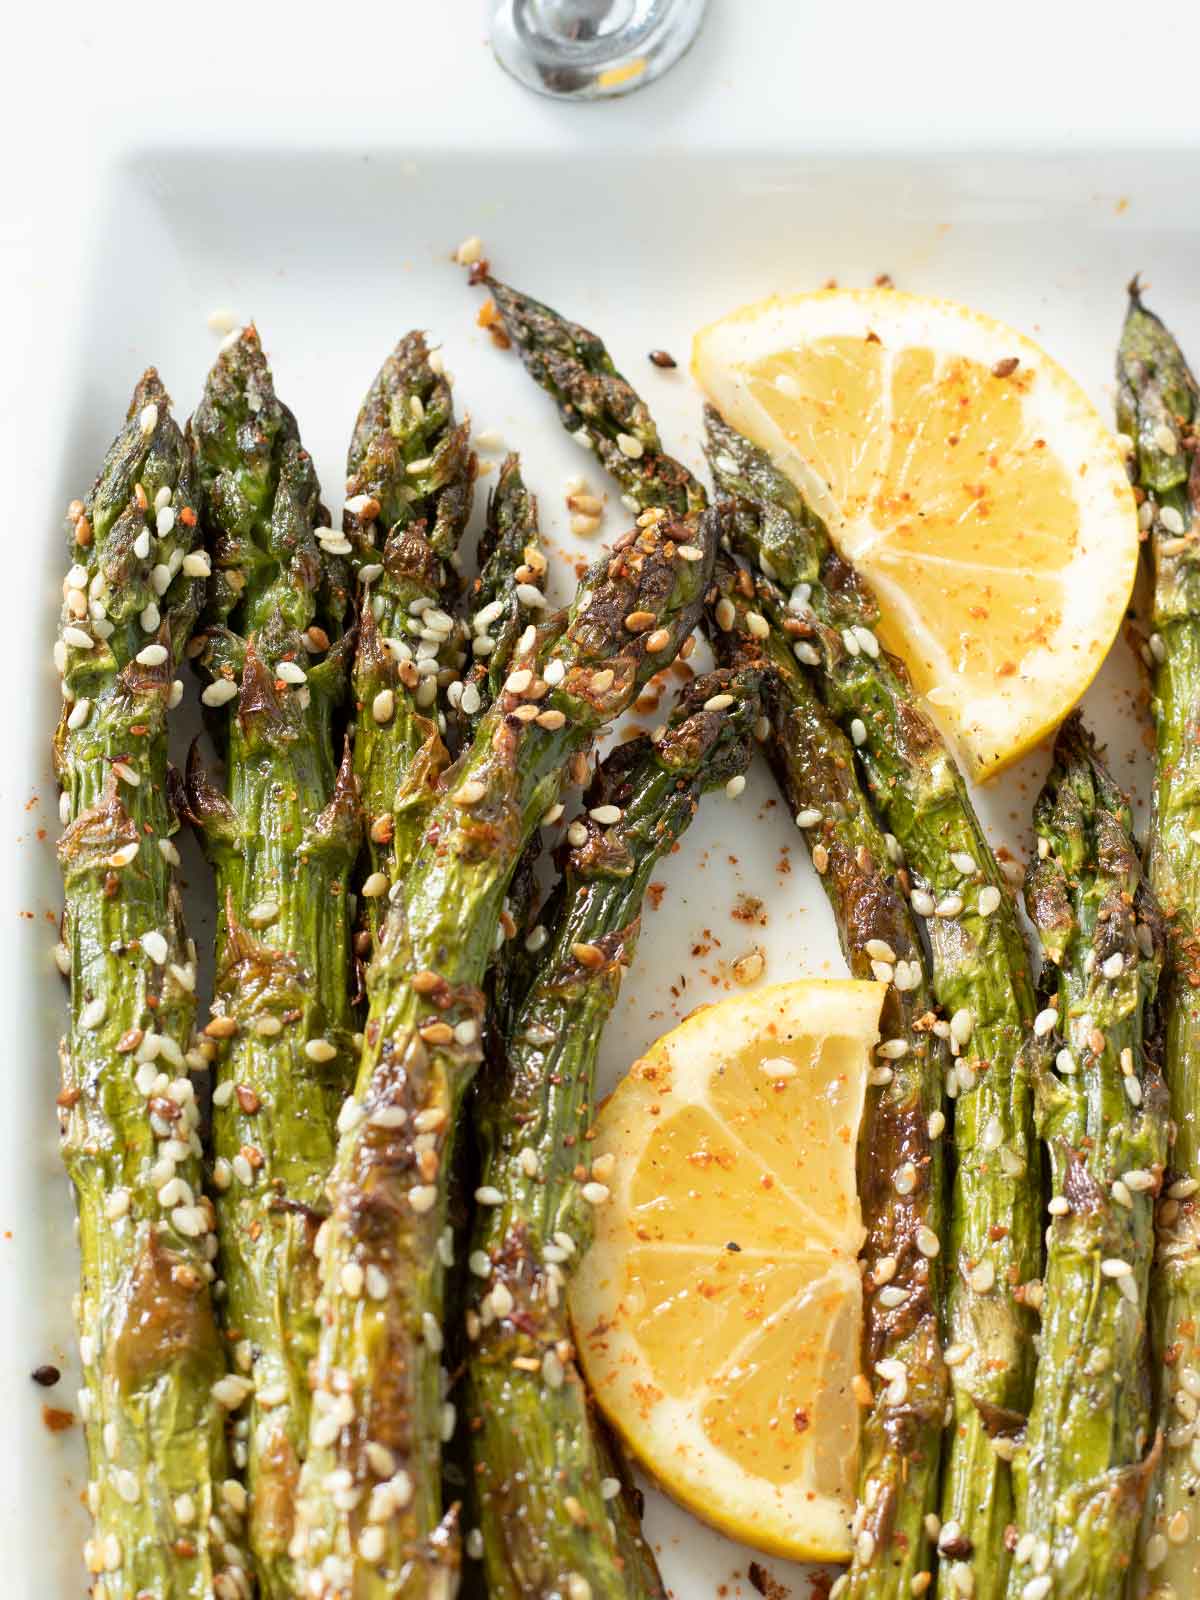 Asparagus stalks roasted in the oven with sesame seeds and sprinkled with red pepper flakes and fresh lemon slices